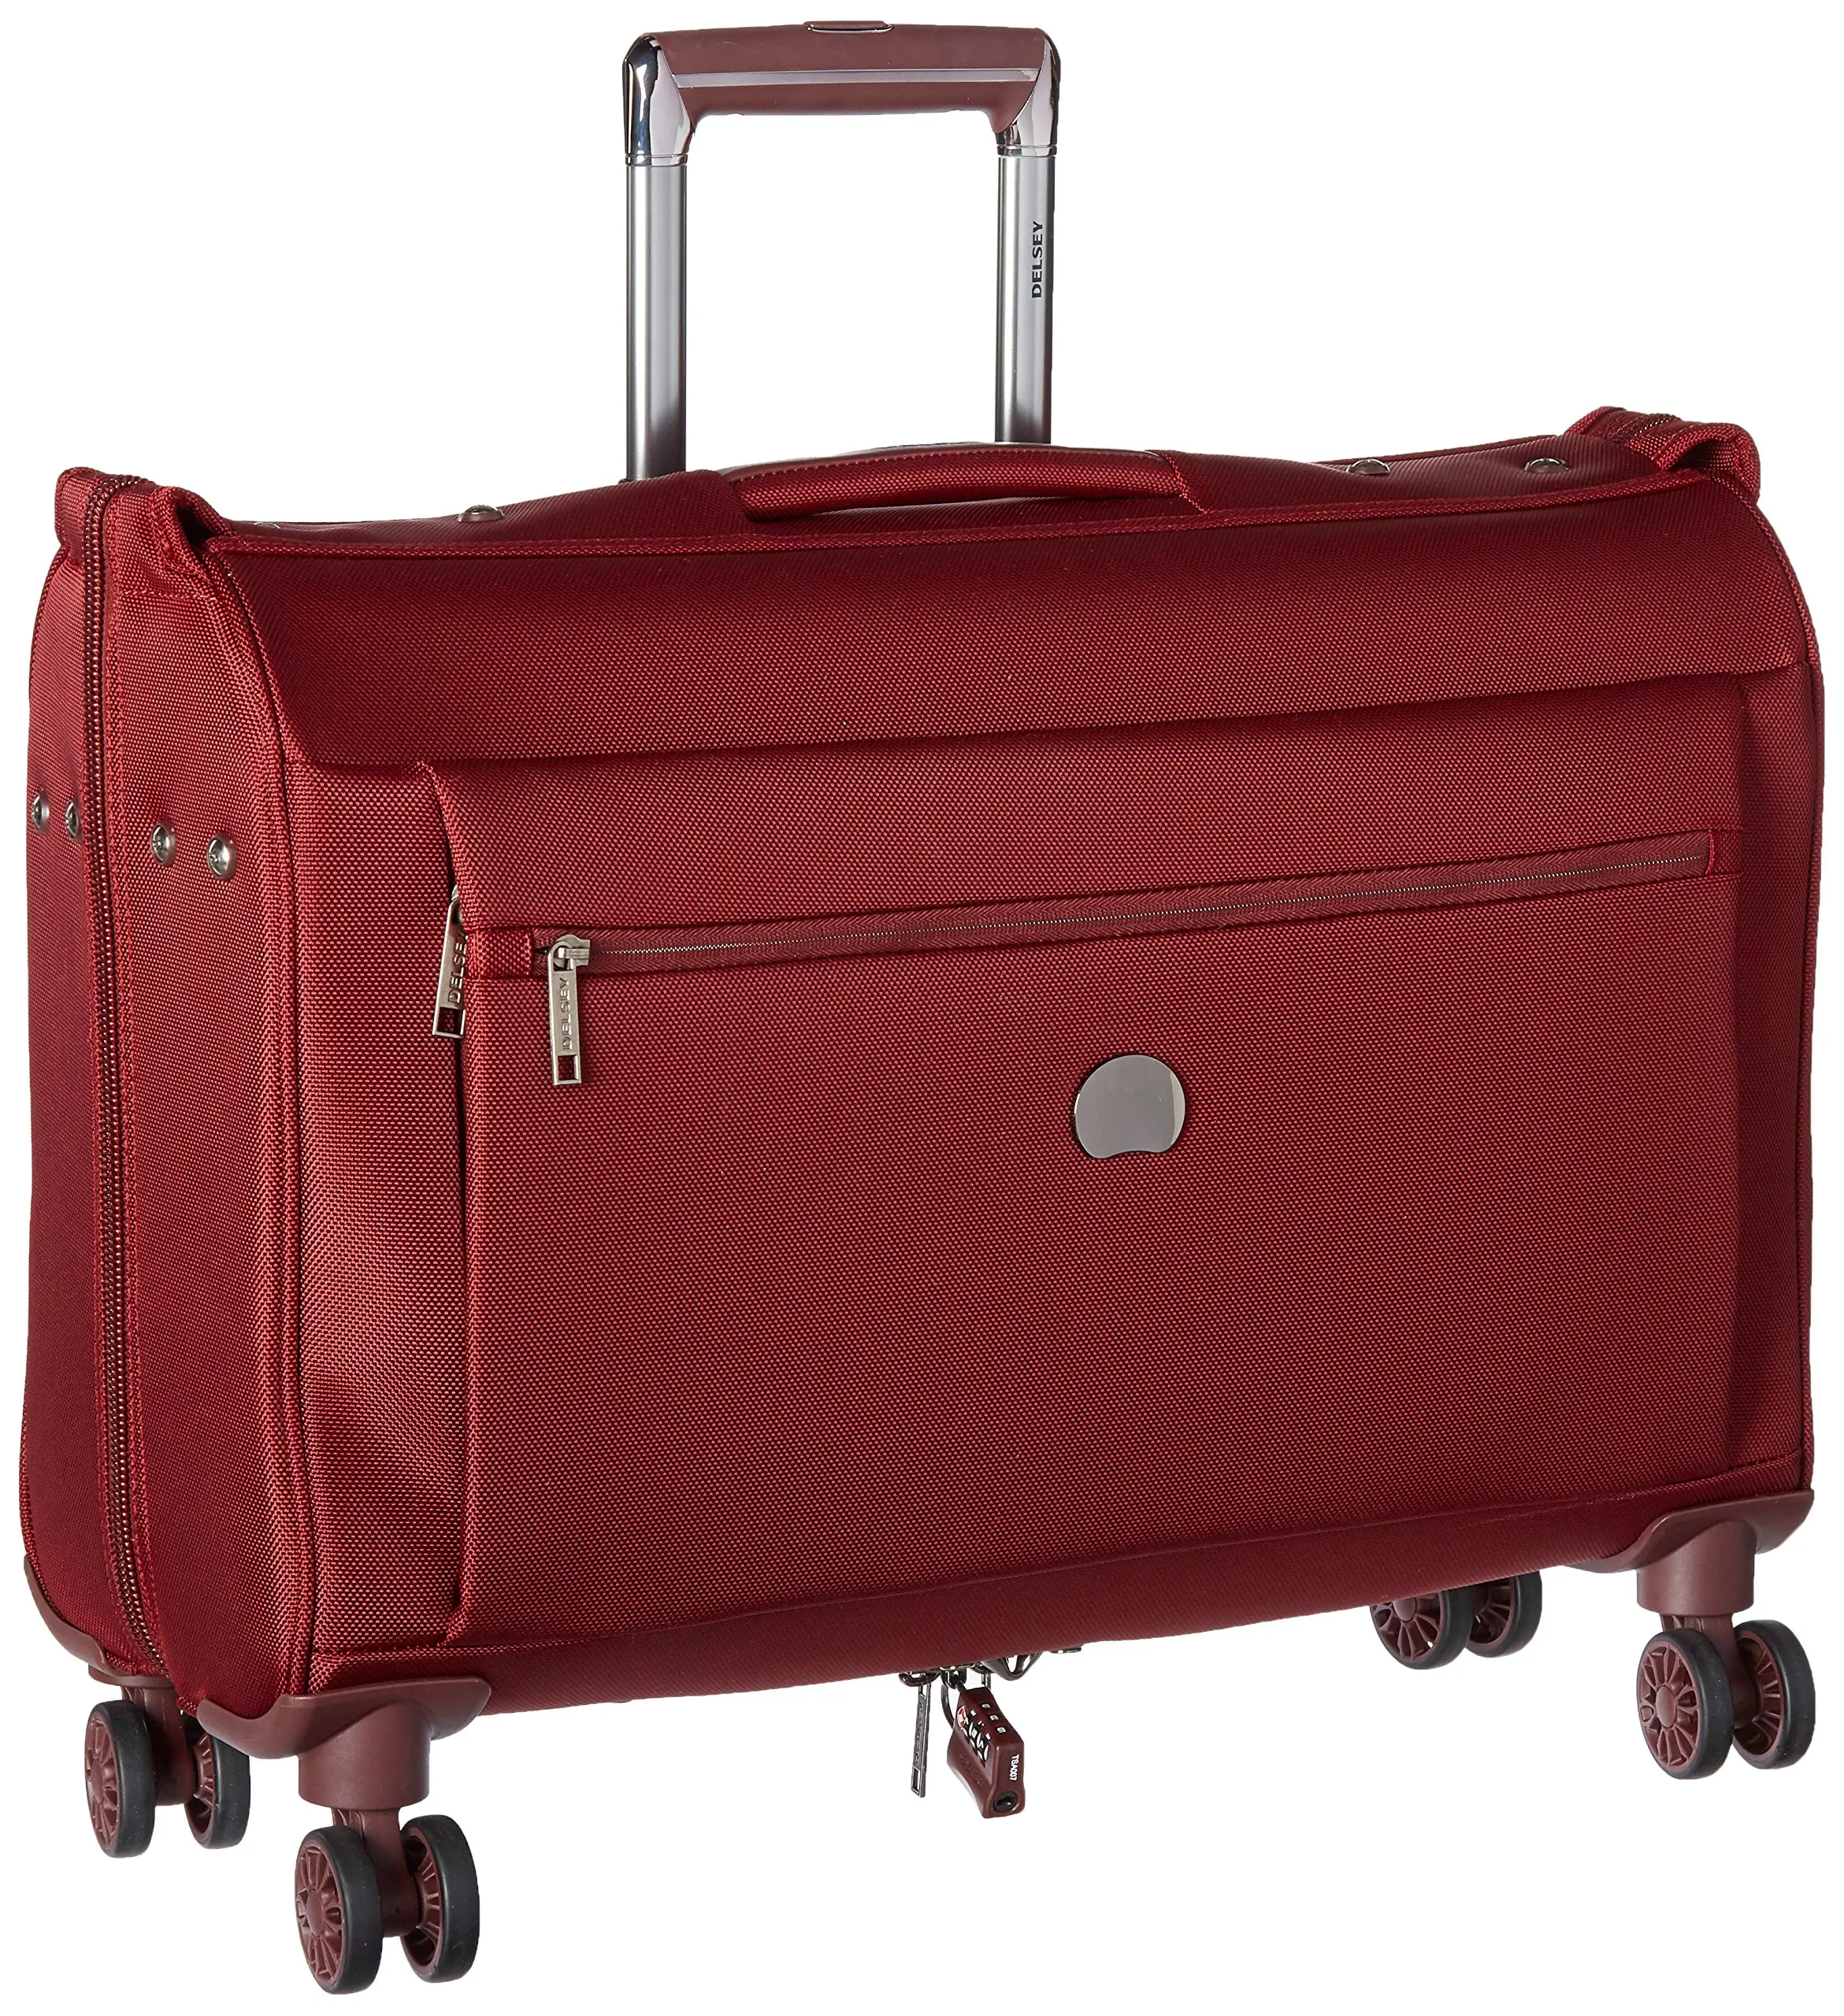 Buy Delsey Luggage Montmartre+ 4 Wheel Spinner Garment Bag, Bordeaux in Cheap Price on 0